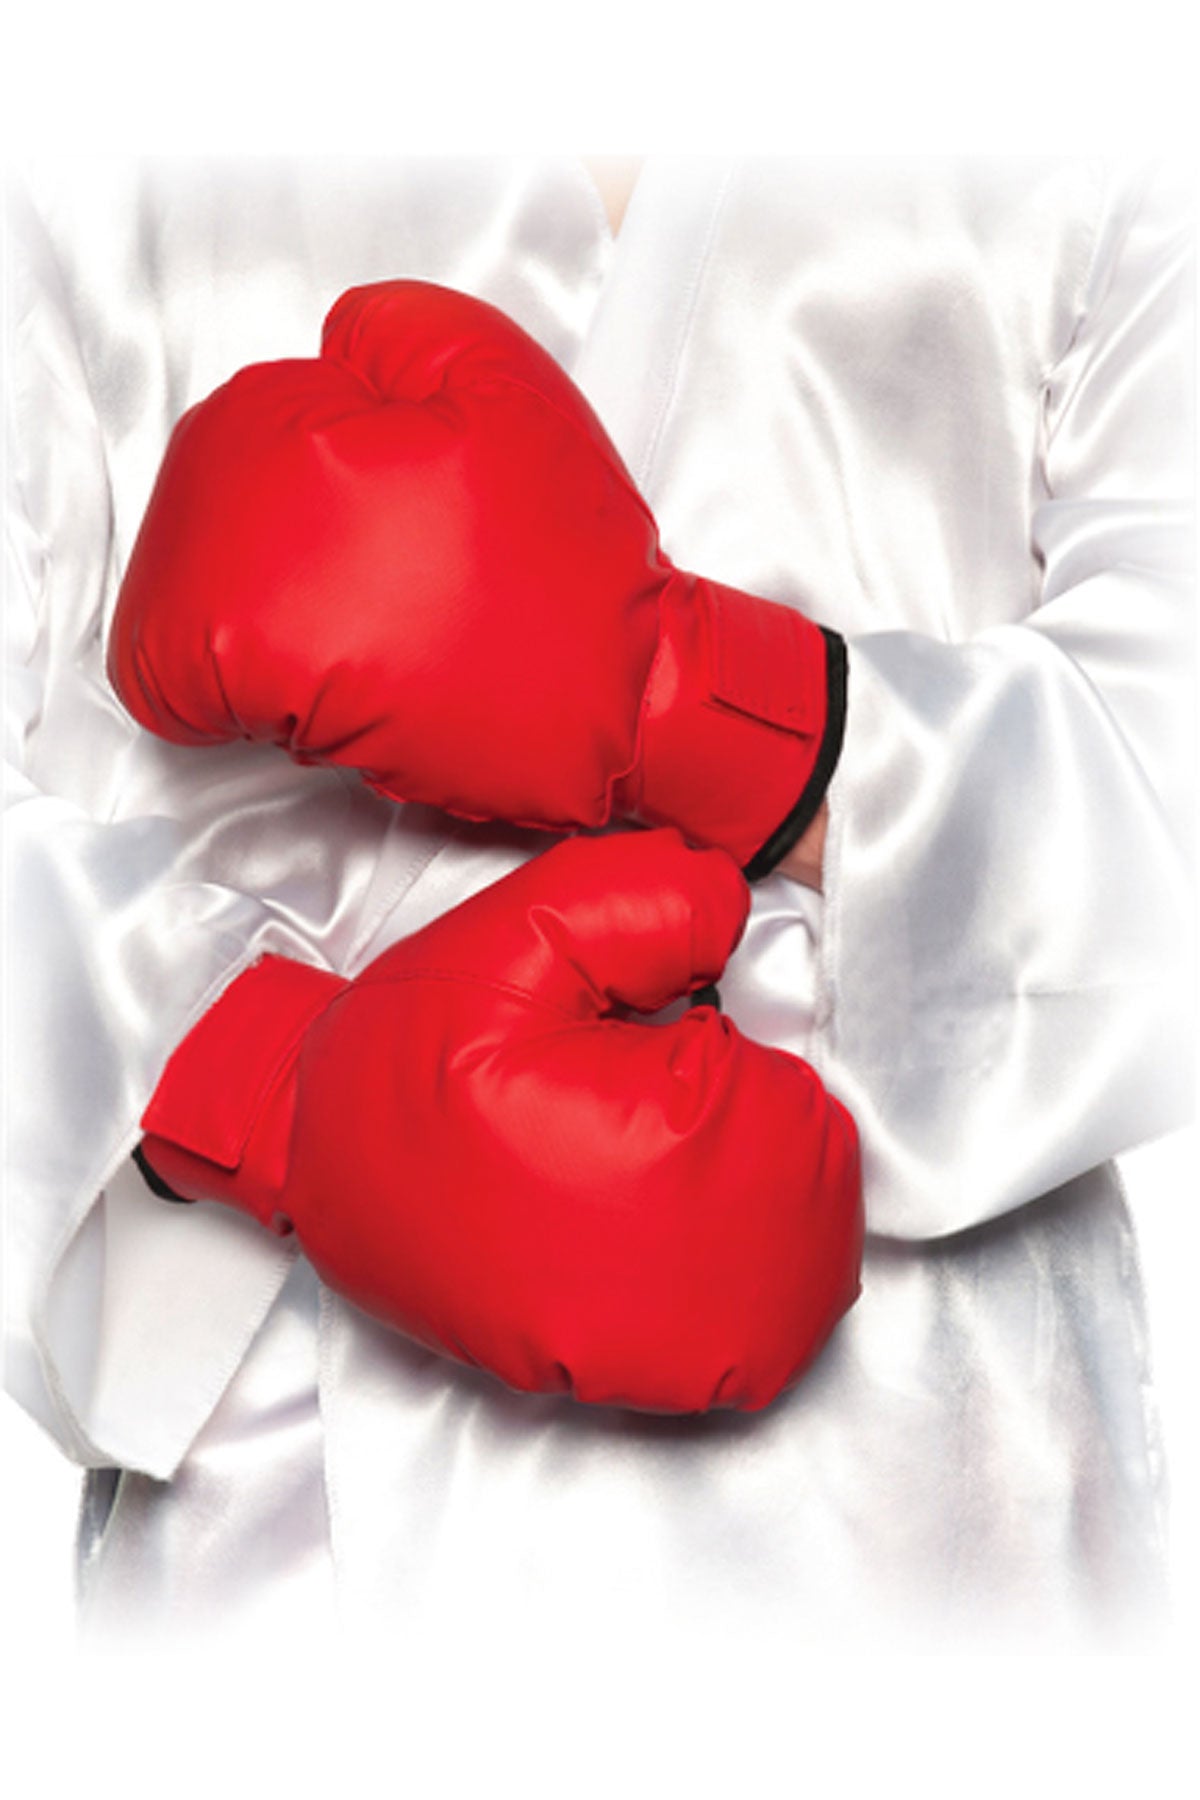 Boxing Gloves-Red Underwraps  30834